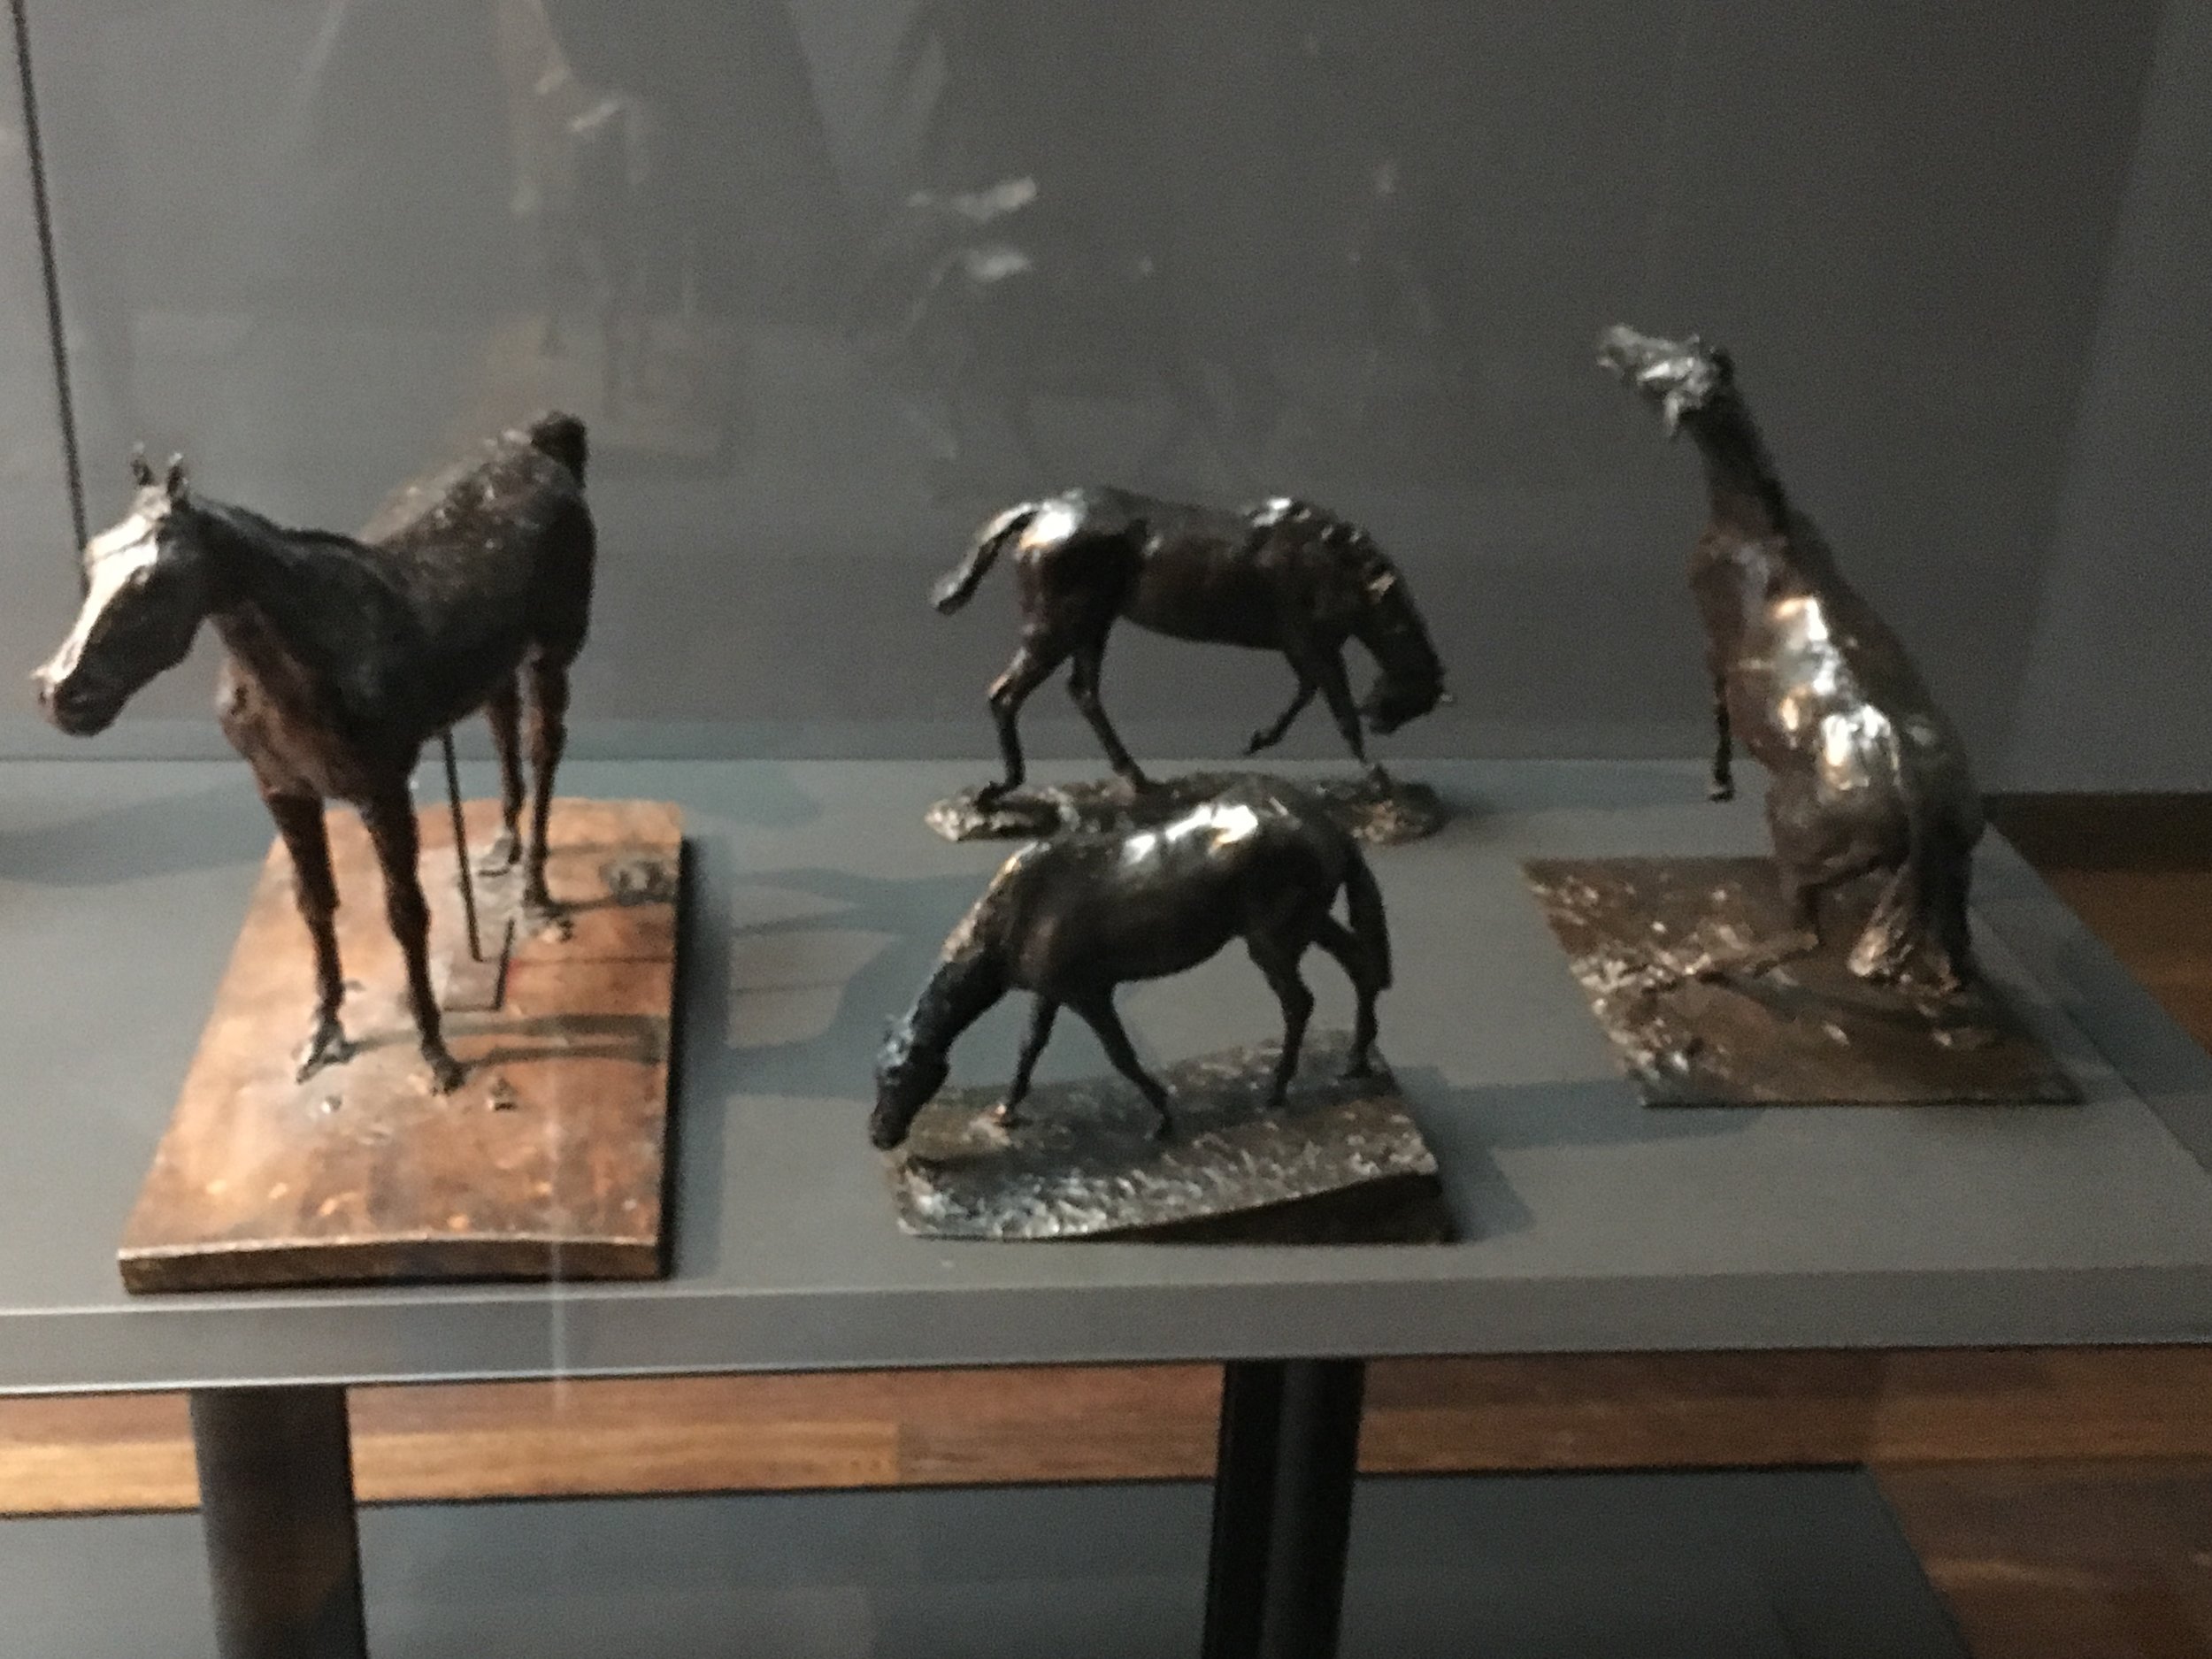  Limited opportunities, almost none, for photos in the museum itself.  I was able to capture this one of horse sculptures (for my niece) 